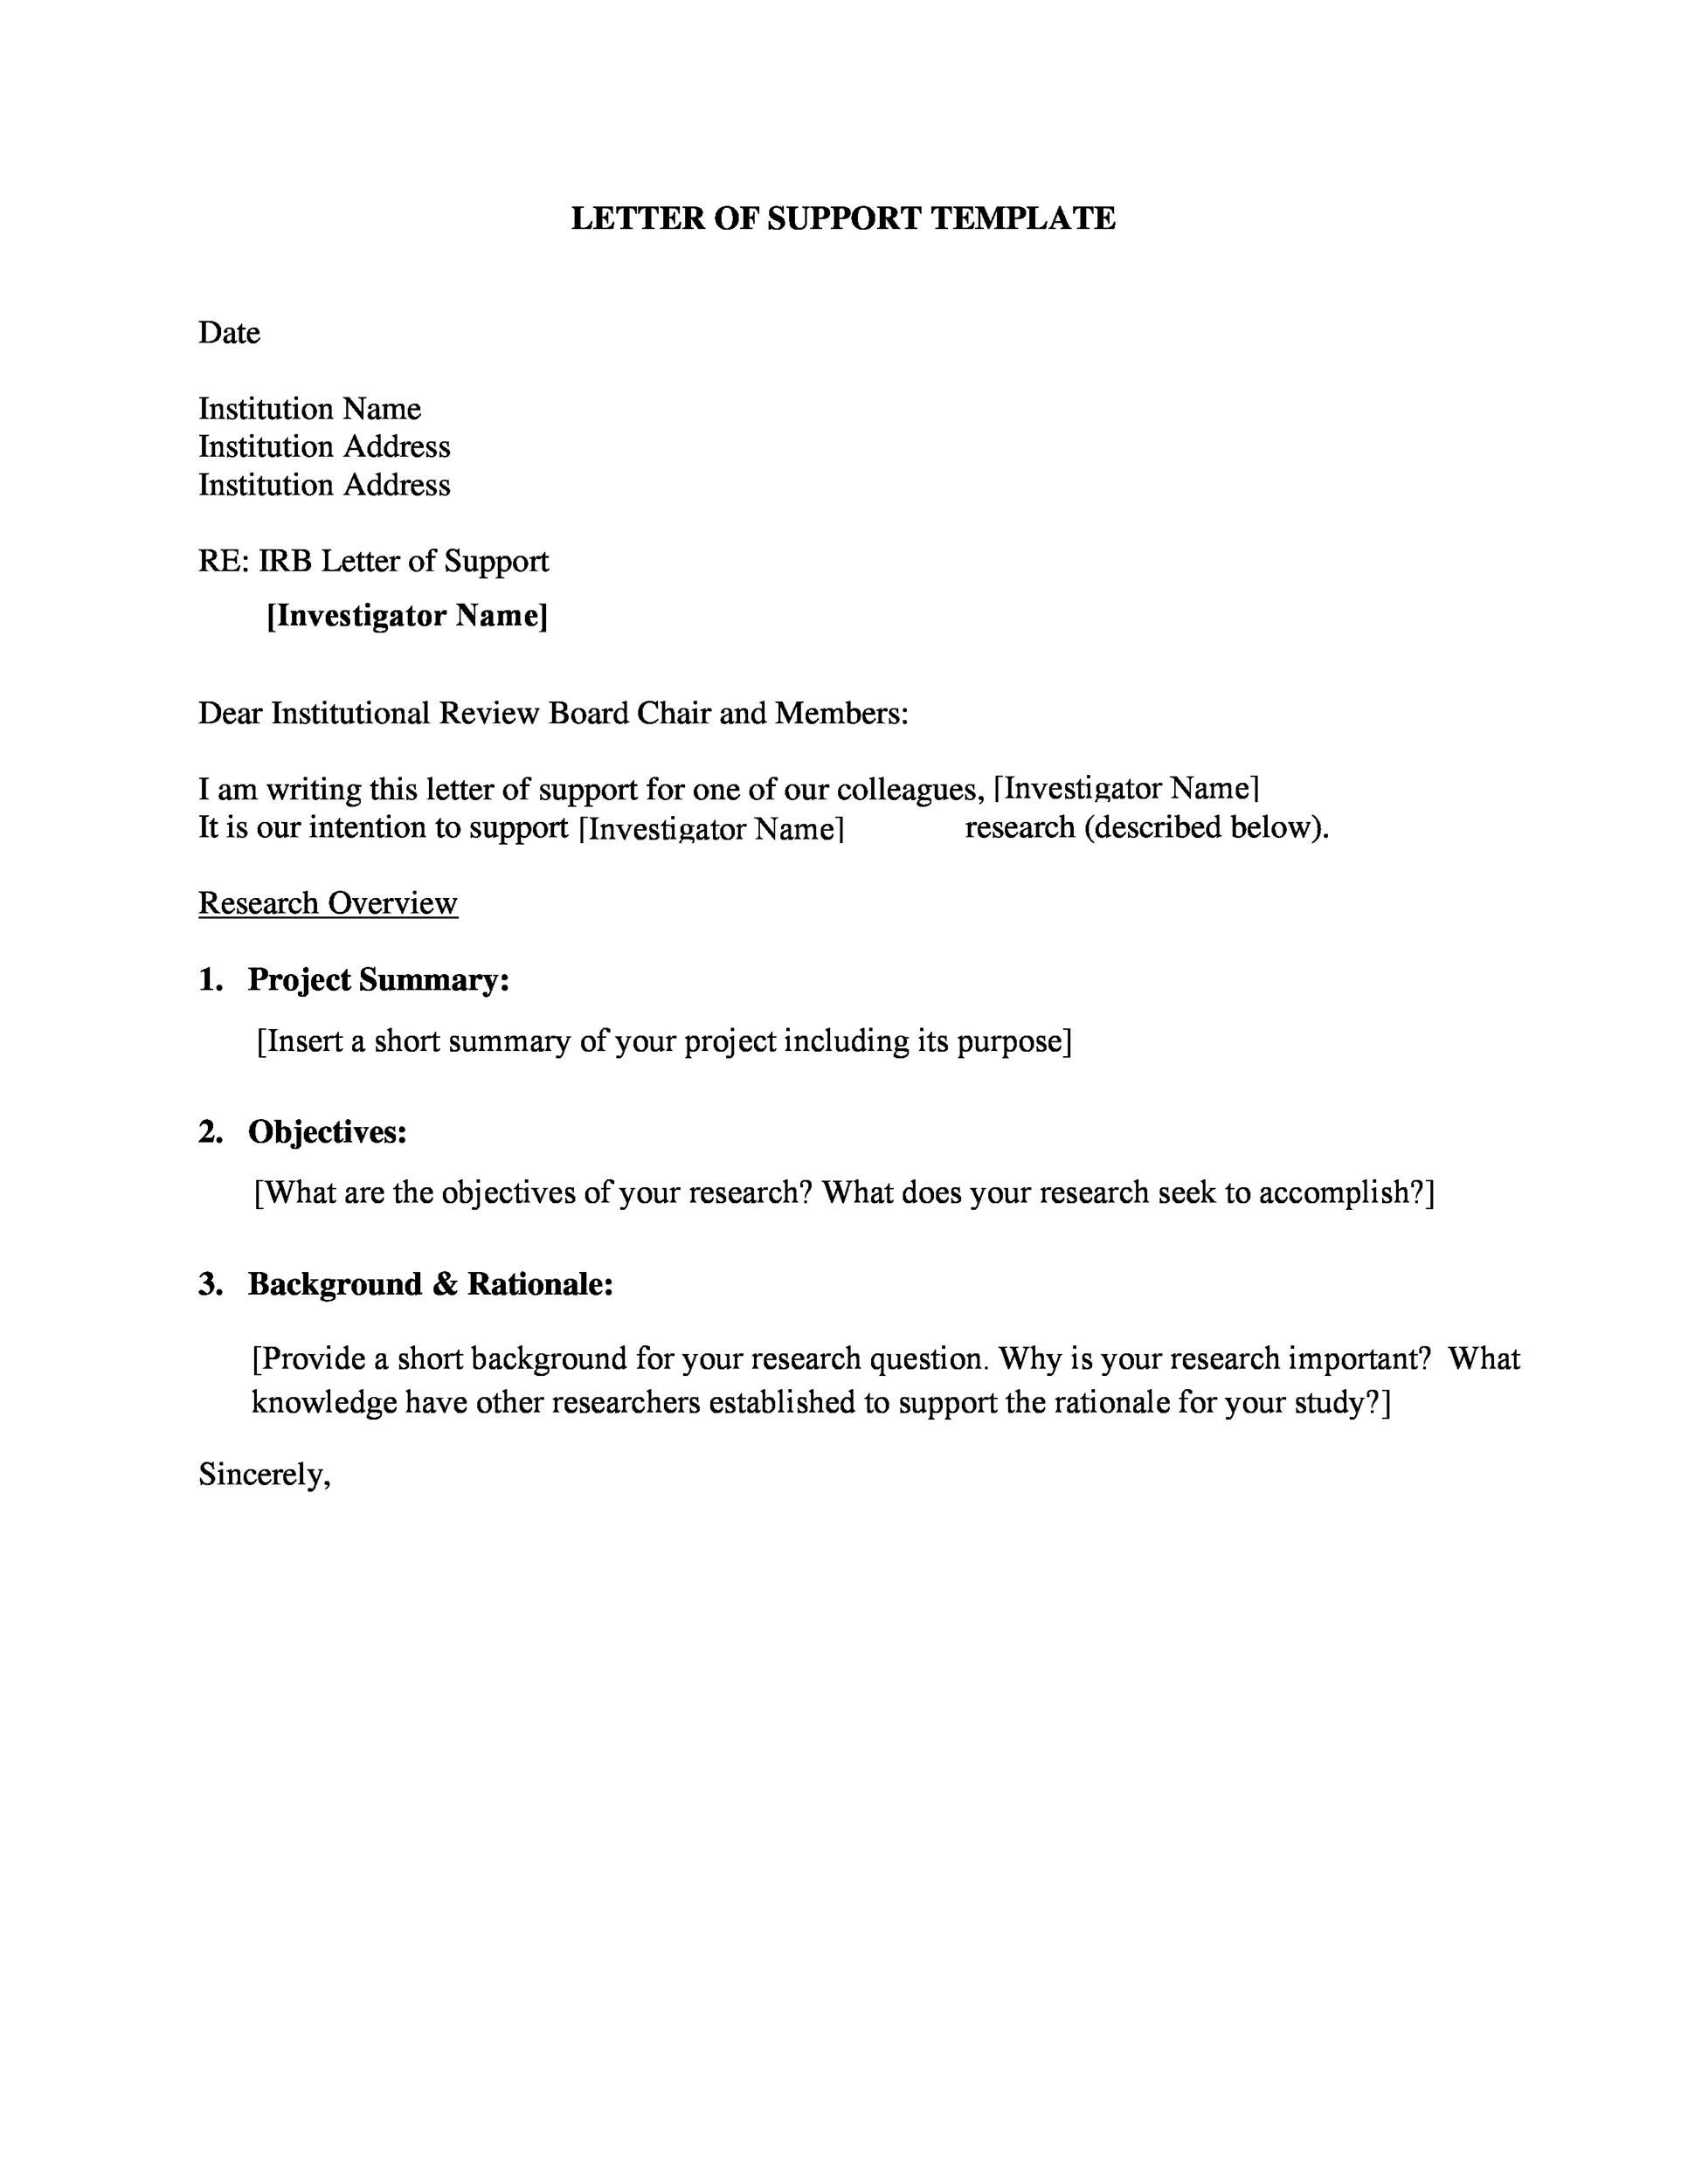 Sample Letter Of Recommendation For A Teacher Colleague from templatelab.com